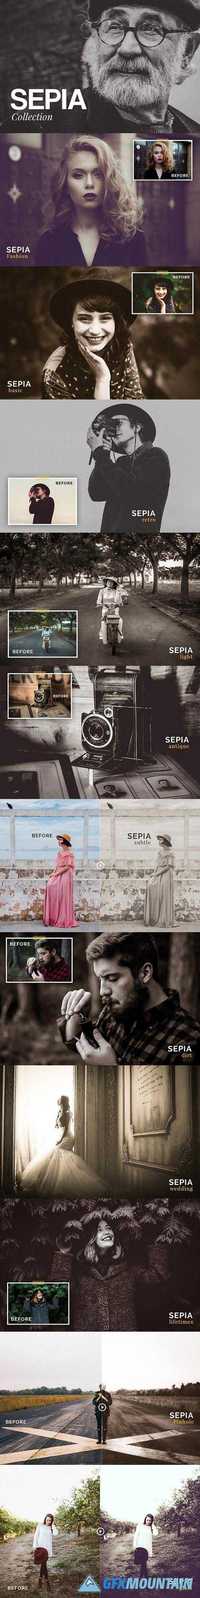 Sepia Collection - Lightroom Presets 1268389